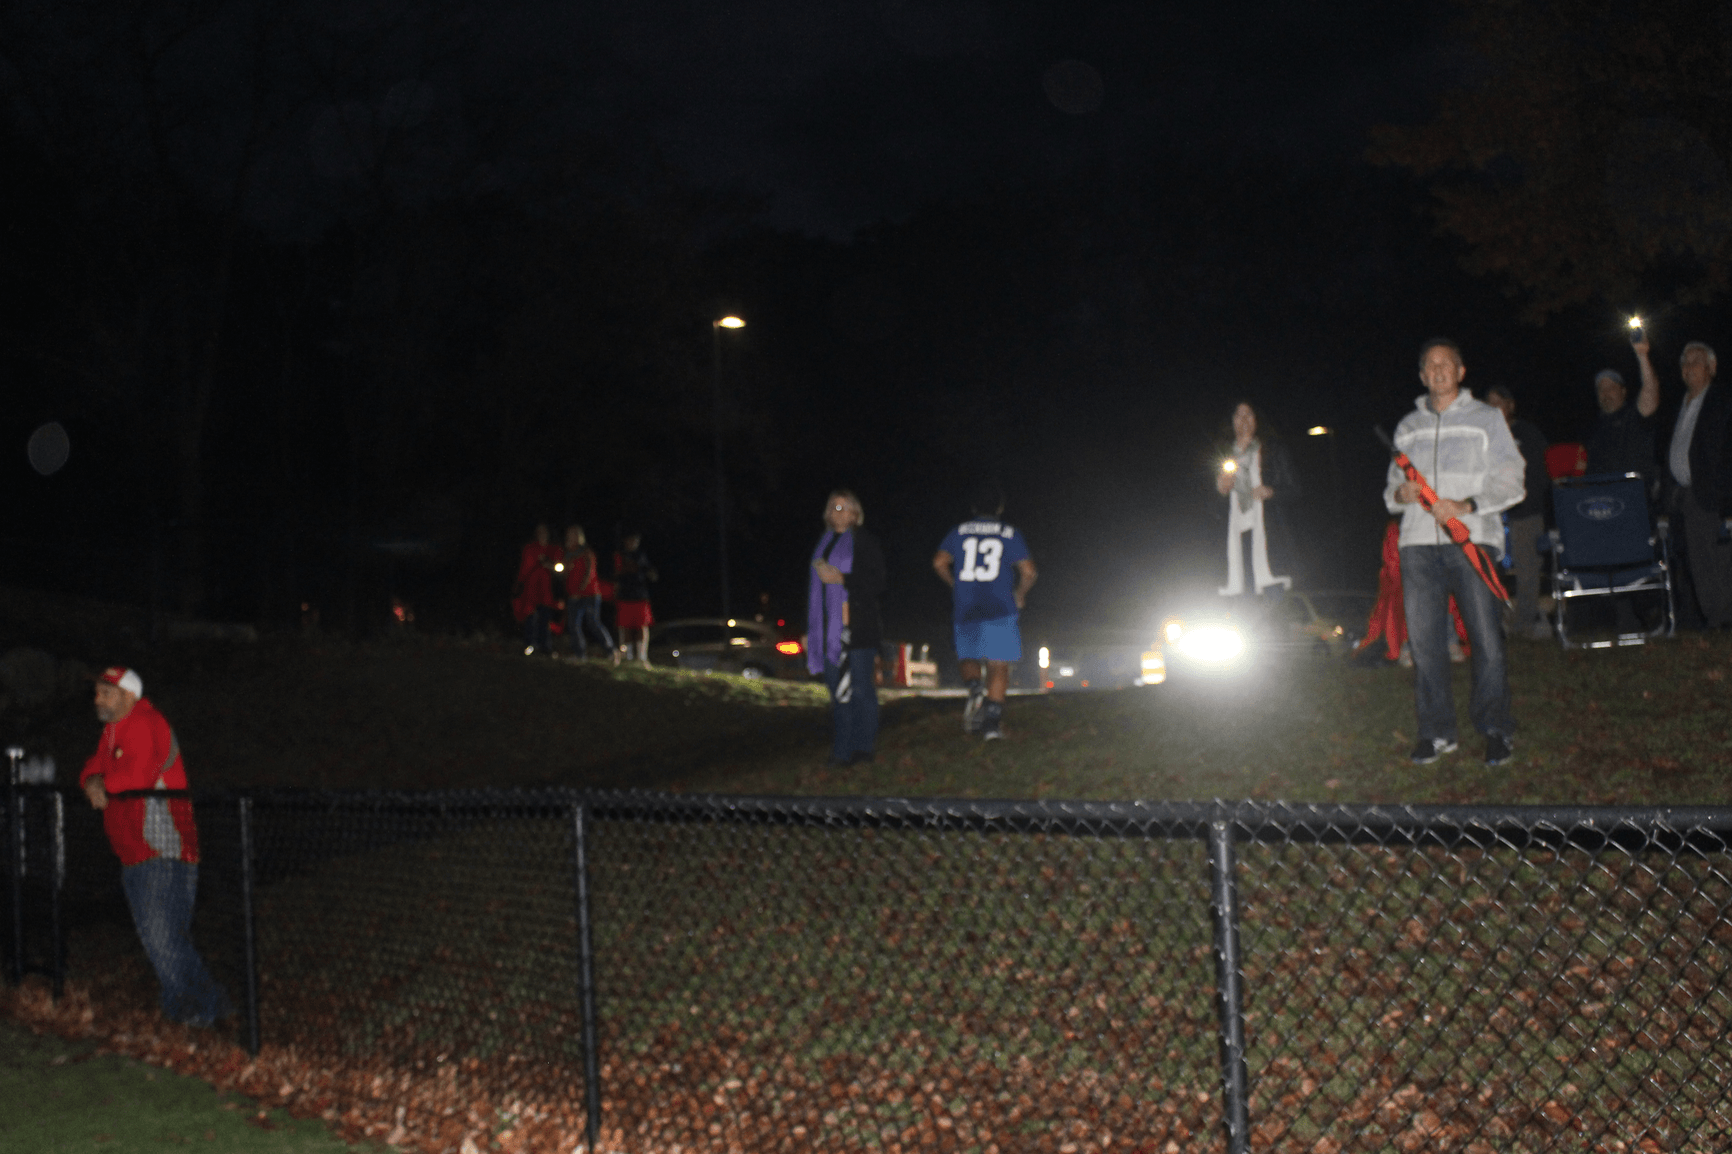 Headlights of cars shone from the parking lot and parents held up flashlights as the JV football game proceeded on field 7 in semi-darkness on Nov 6, 2017, the first day after daylight savings time and new dismissal times converged Photo: Leslie Yager